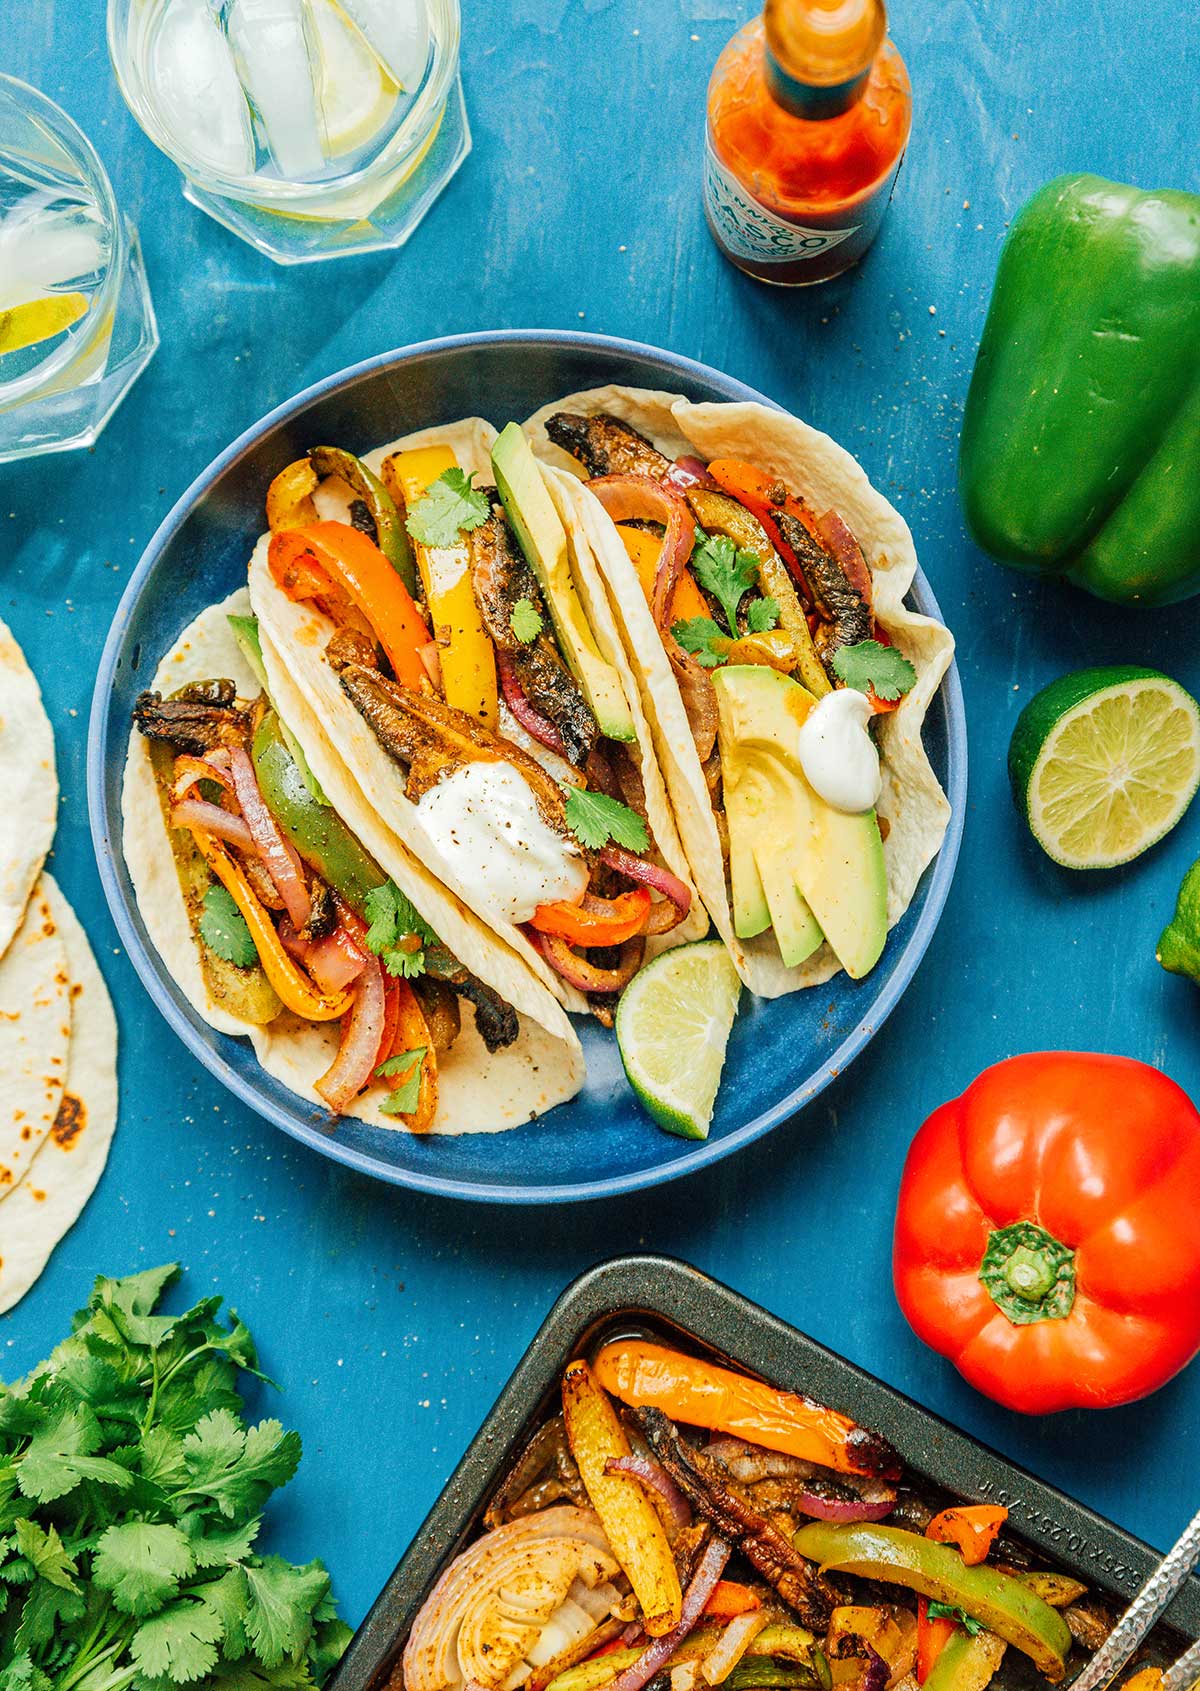 A blue plate filled with 3 vegetable fajitas and surrounded by various fajita ingredients